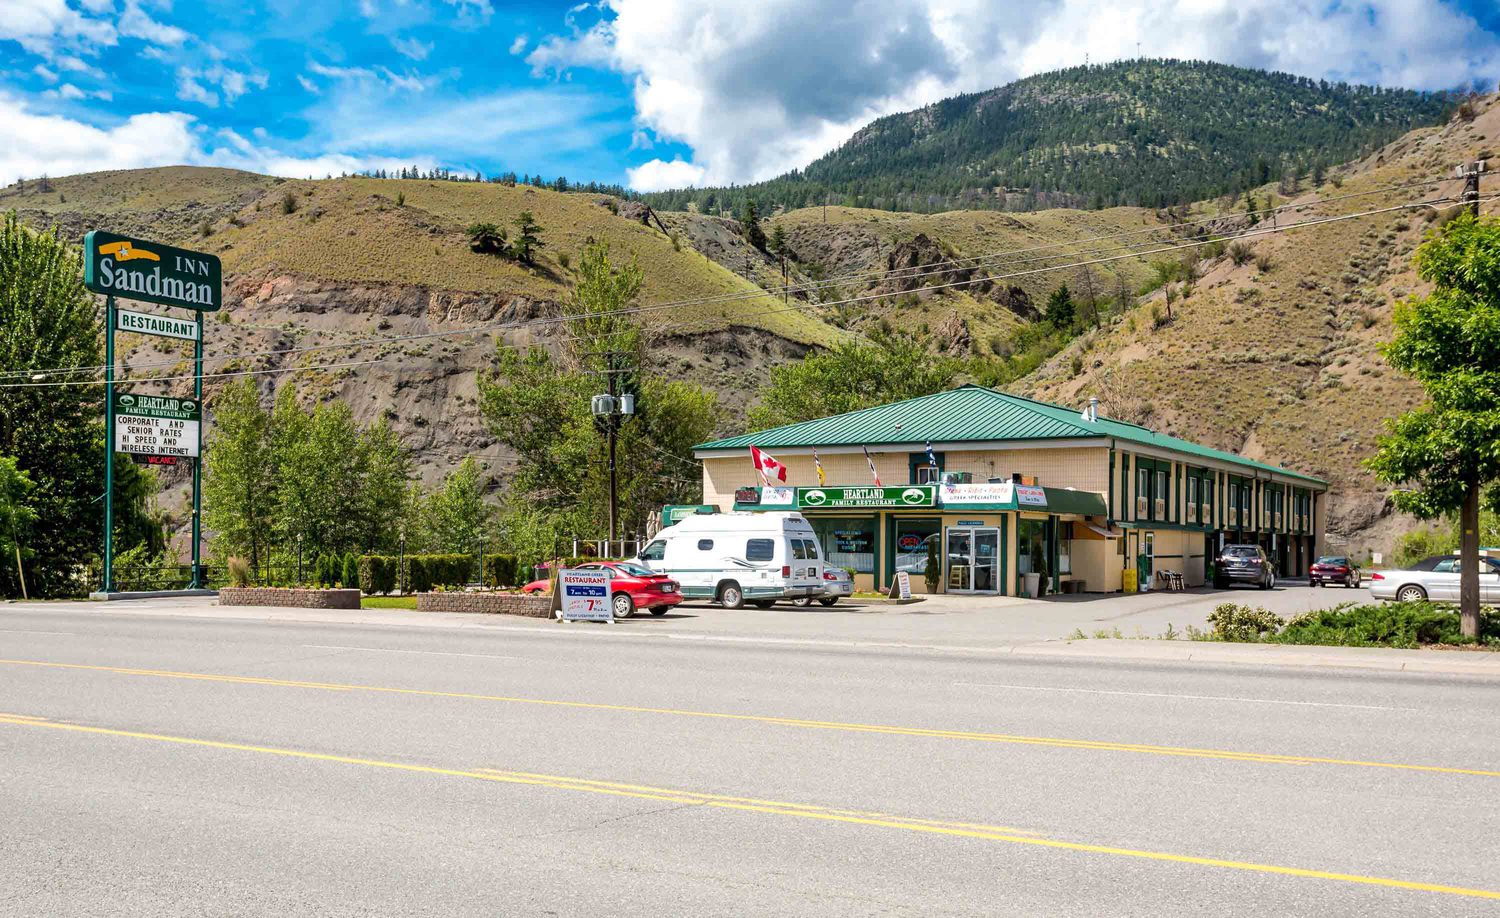 23+ schön Bild Sandman Inn Vancouver / Sandman Inn Blue River, Blue River, BC, Canada Jobs ... : We will be going to alaska on a cruise and chose this location based on our past.